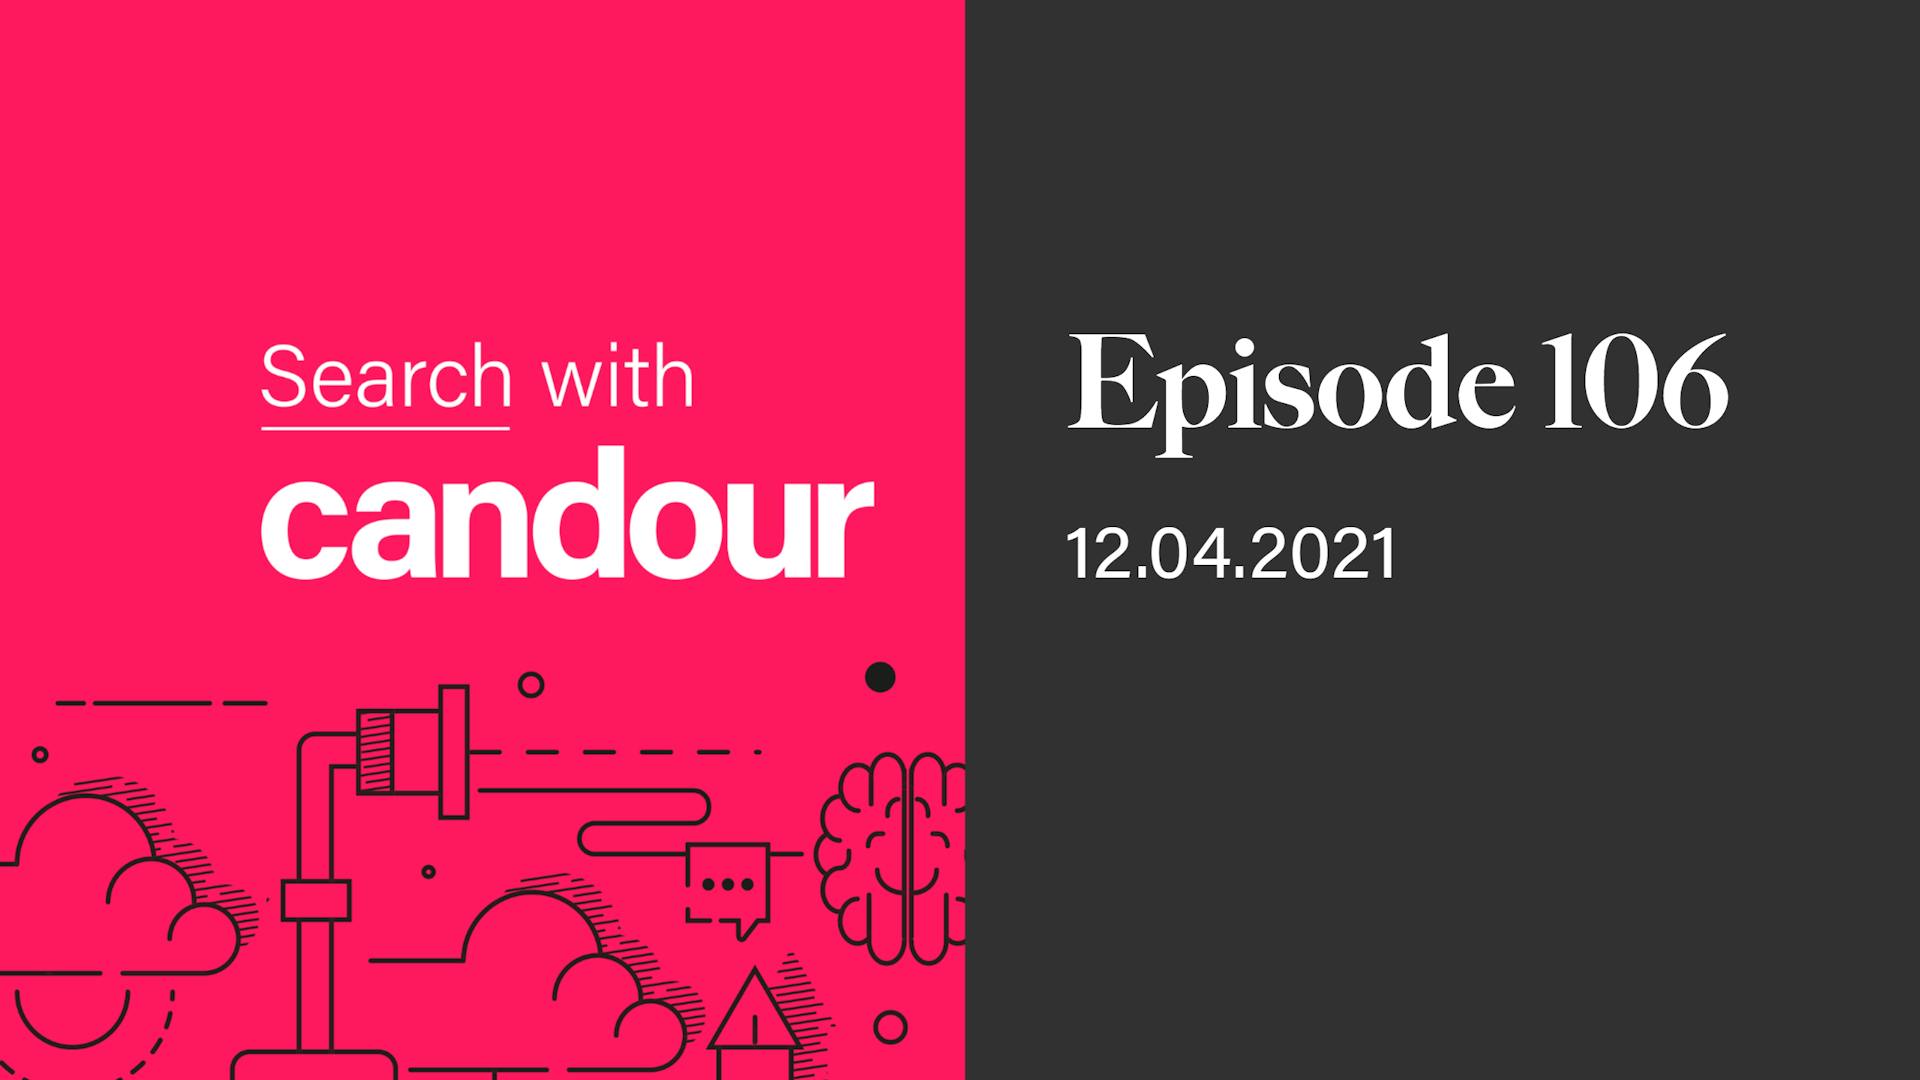 Episode 106 - Search with Candour